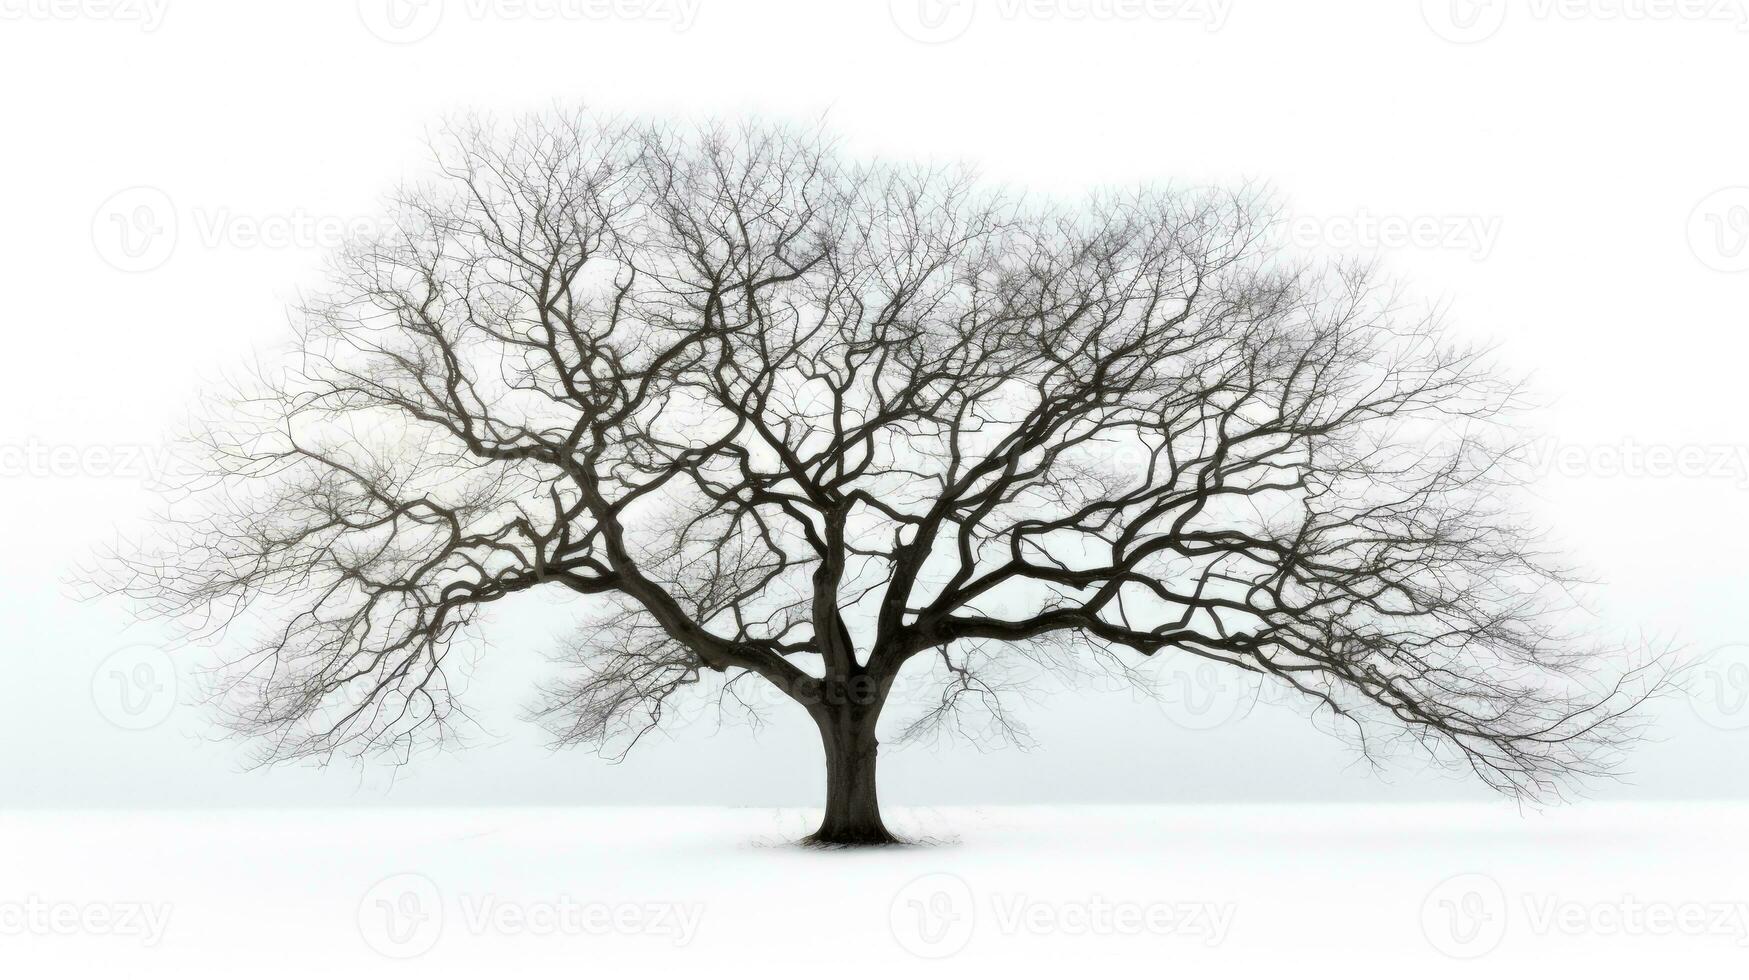 Winter tree without leaves on white background. silhouette concept photo